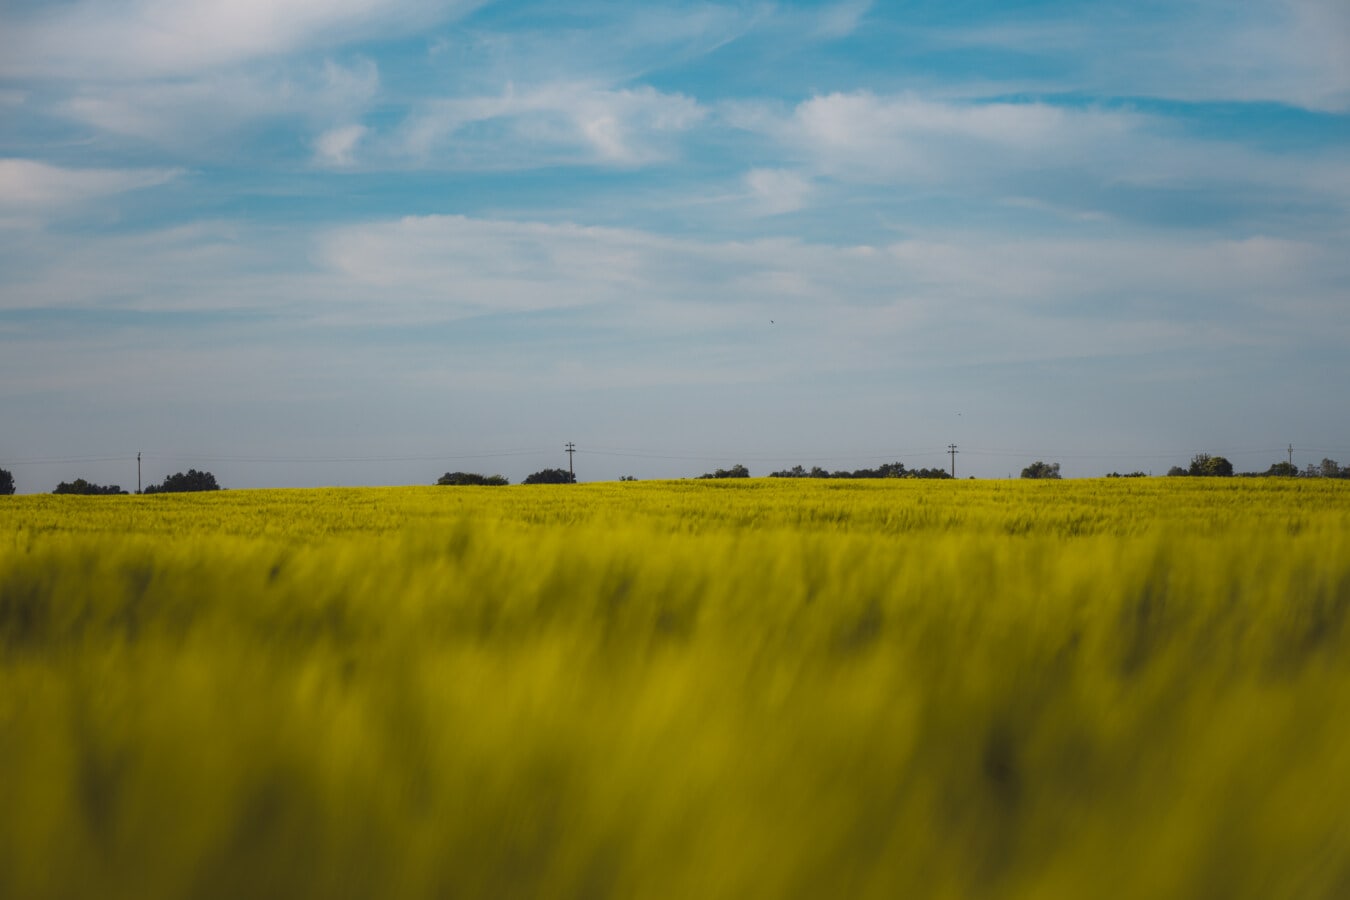 barley, agriculture, flat, landscape, field, rural, nature, fair weather, farmland, cereal